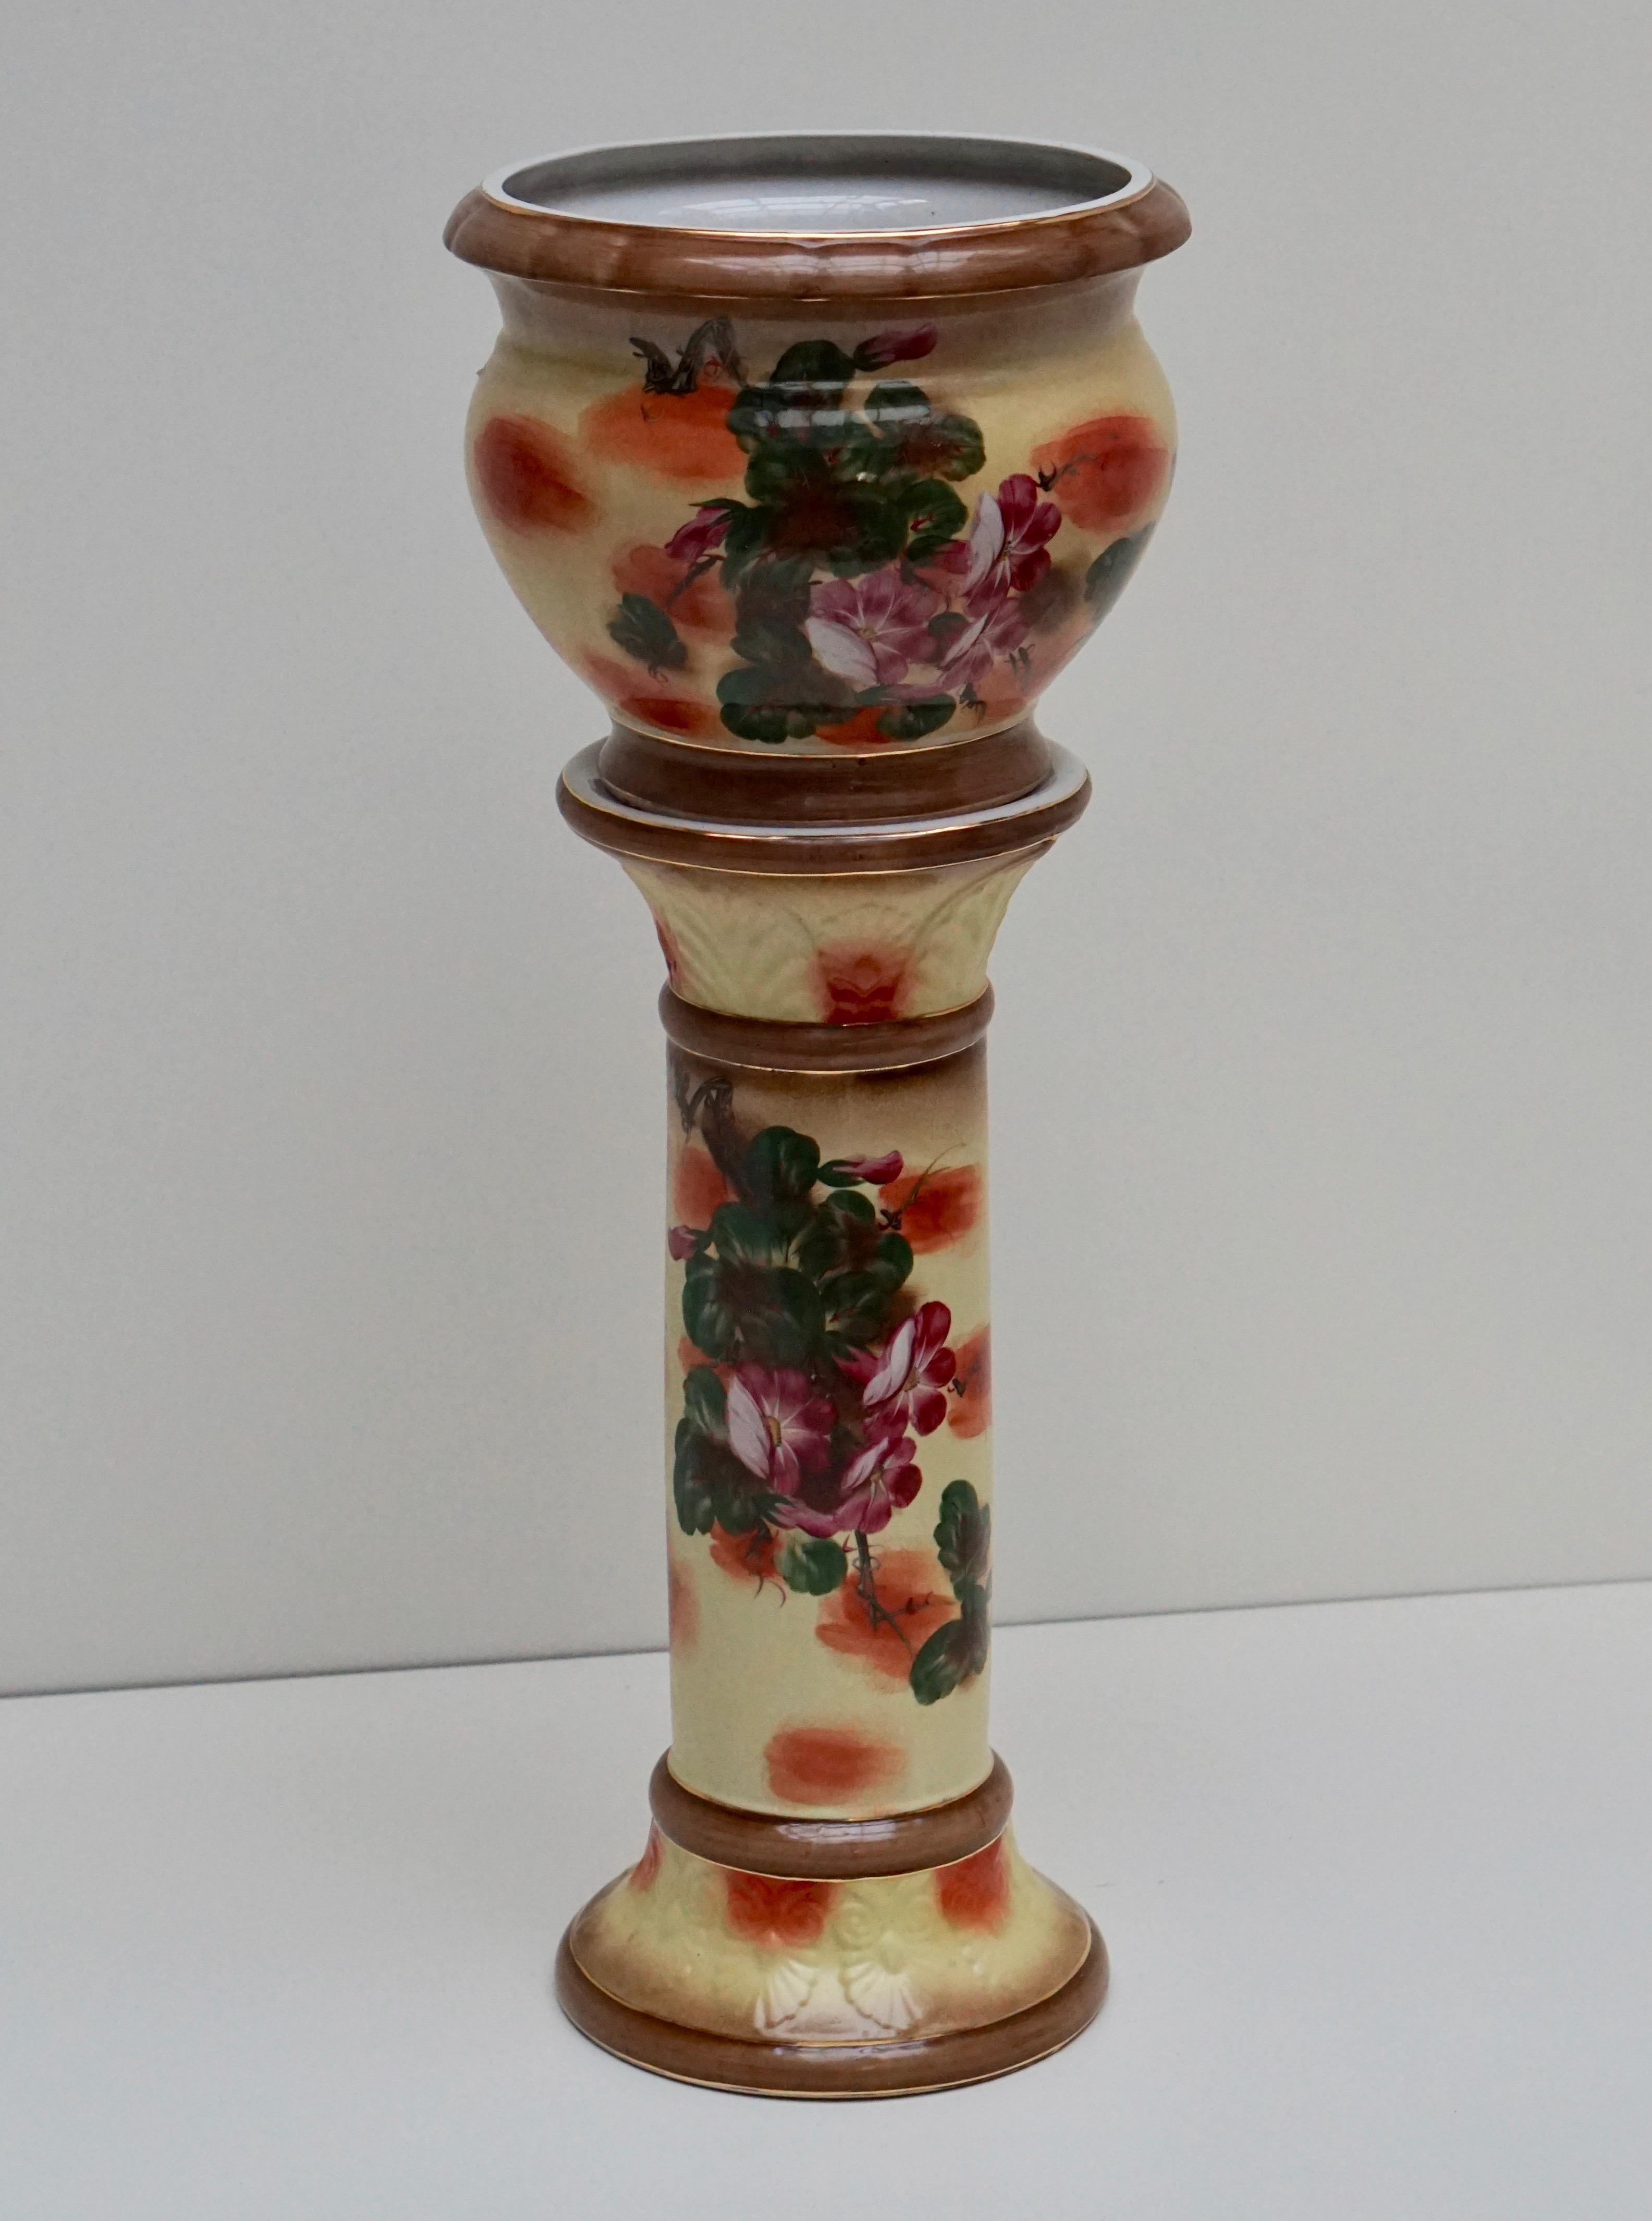 England, an attractive and large Staffordshire ceramic one of a kind hand thrown and richly glazed pot vessel on a stand decorated with beautiful flowers.
Ceramic flower pedestal/Cachepot.
Measures: Height column 61cm, diameter 27 cm.
Height